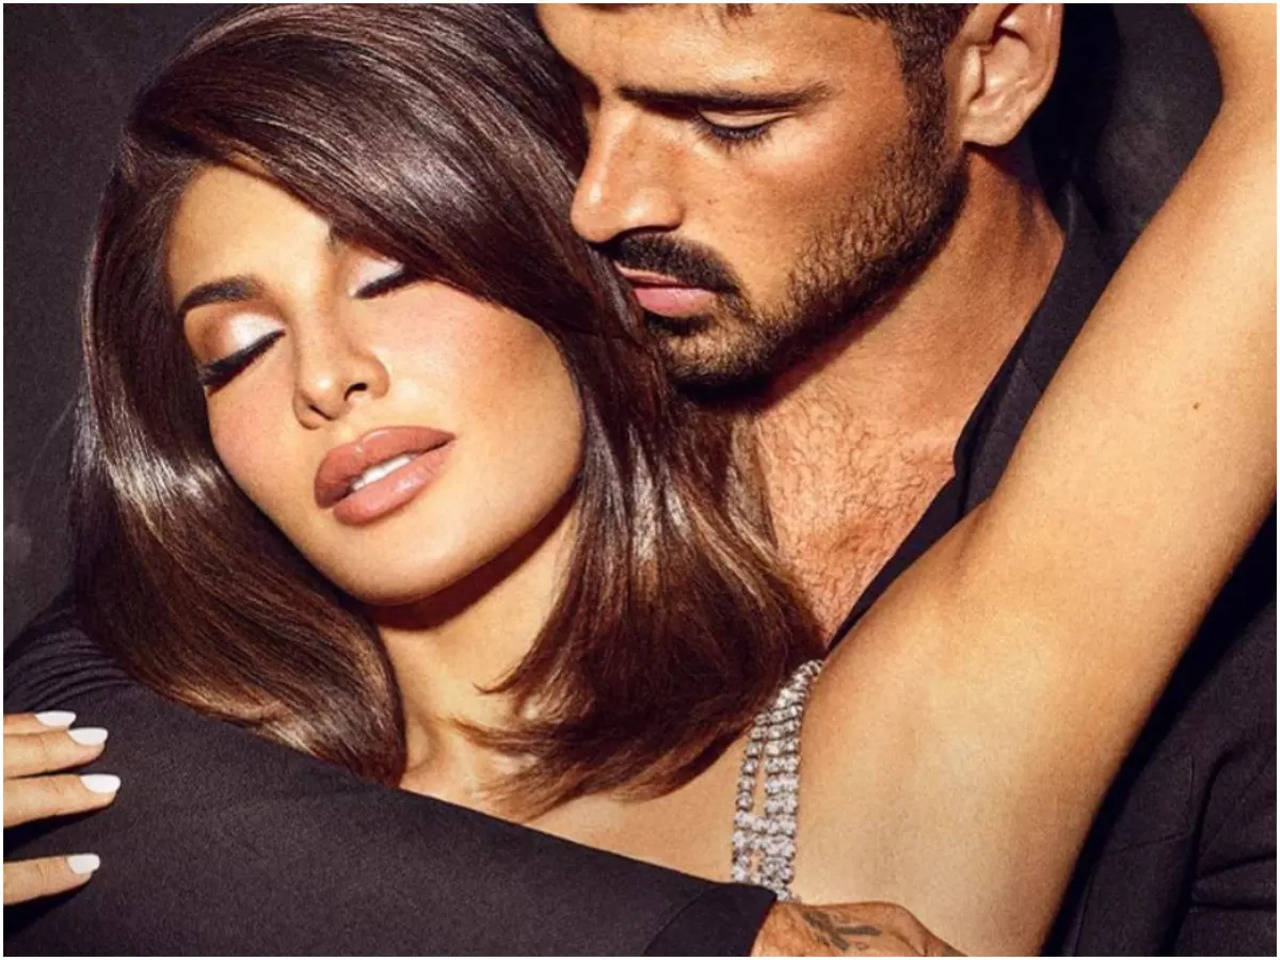 Music Wali Xxx - Michele Morrone makes his Indian debut alongside Jacqueline Fernandez with  'Mud Mud Ke' music video; Italian hunk says 'India here I come!' | Hindi  Movie News - Times of India